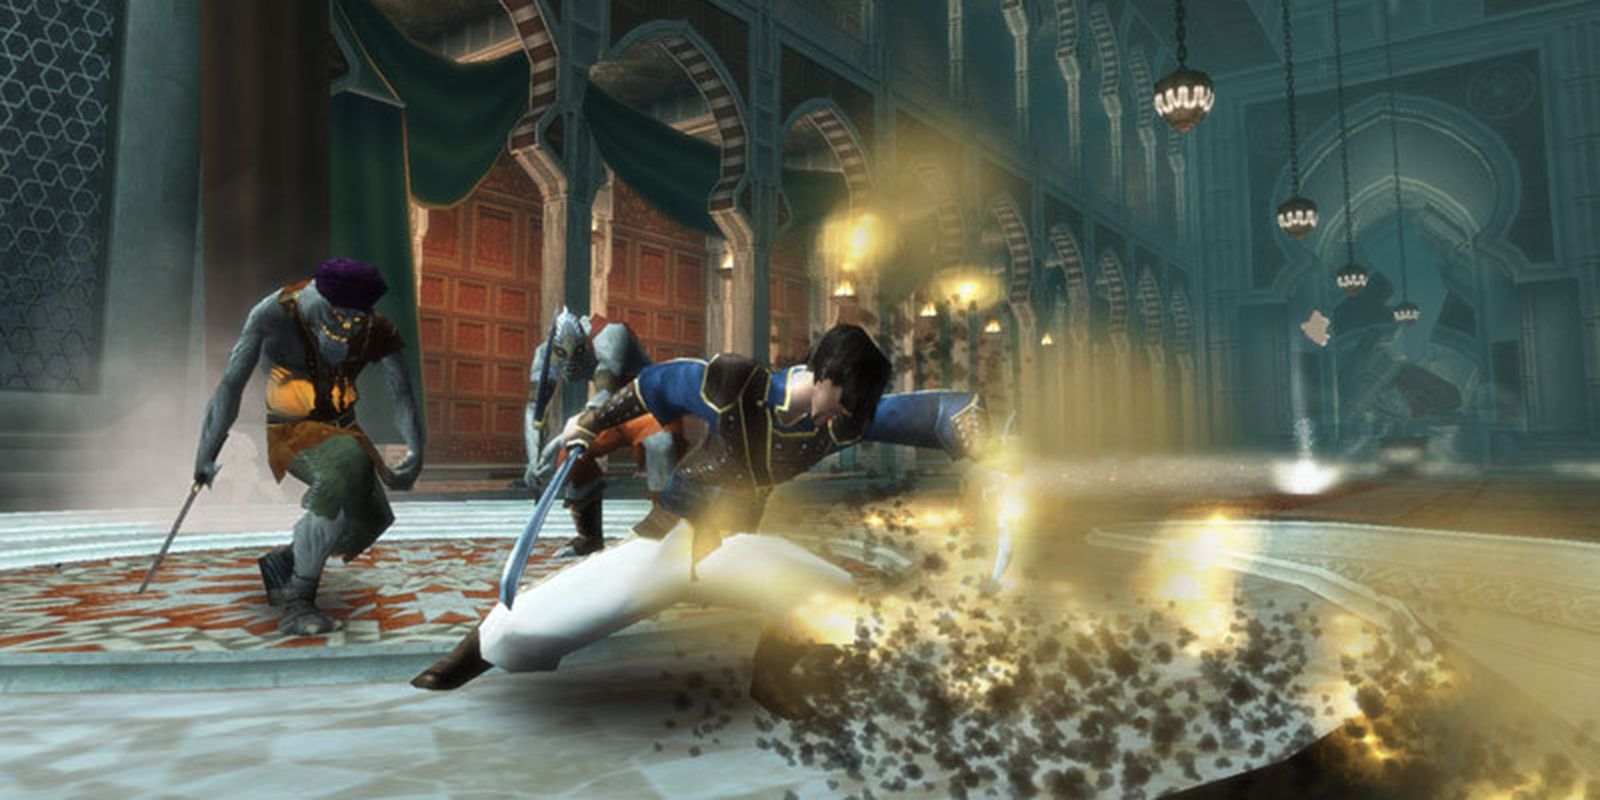 The prince stabs a sand monster in Prince of Persia Sands of Time